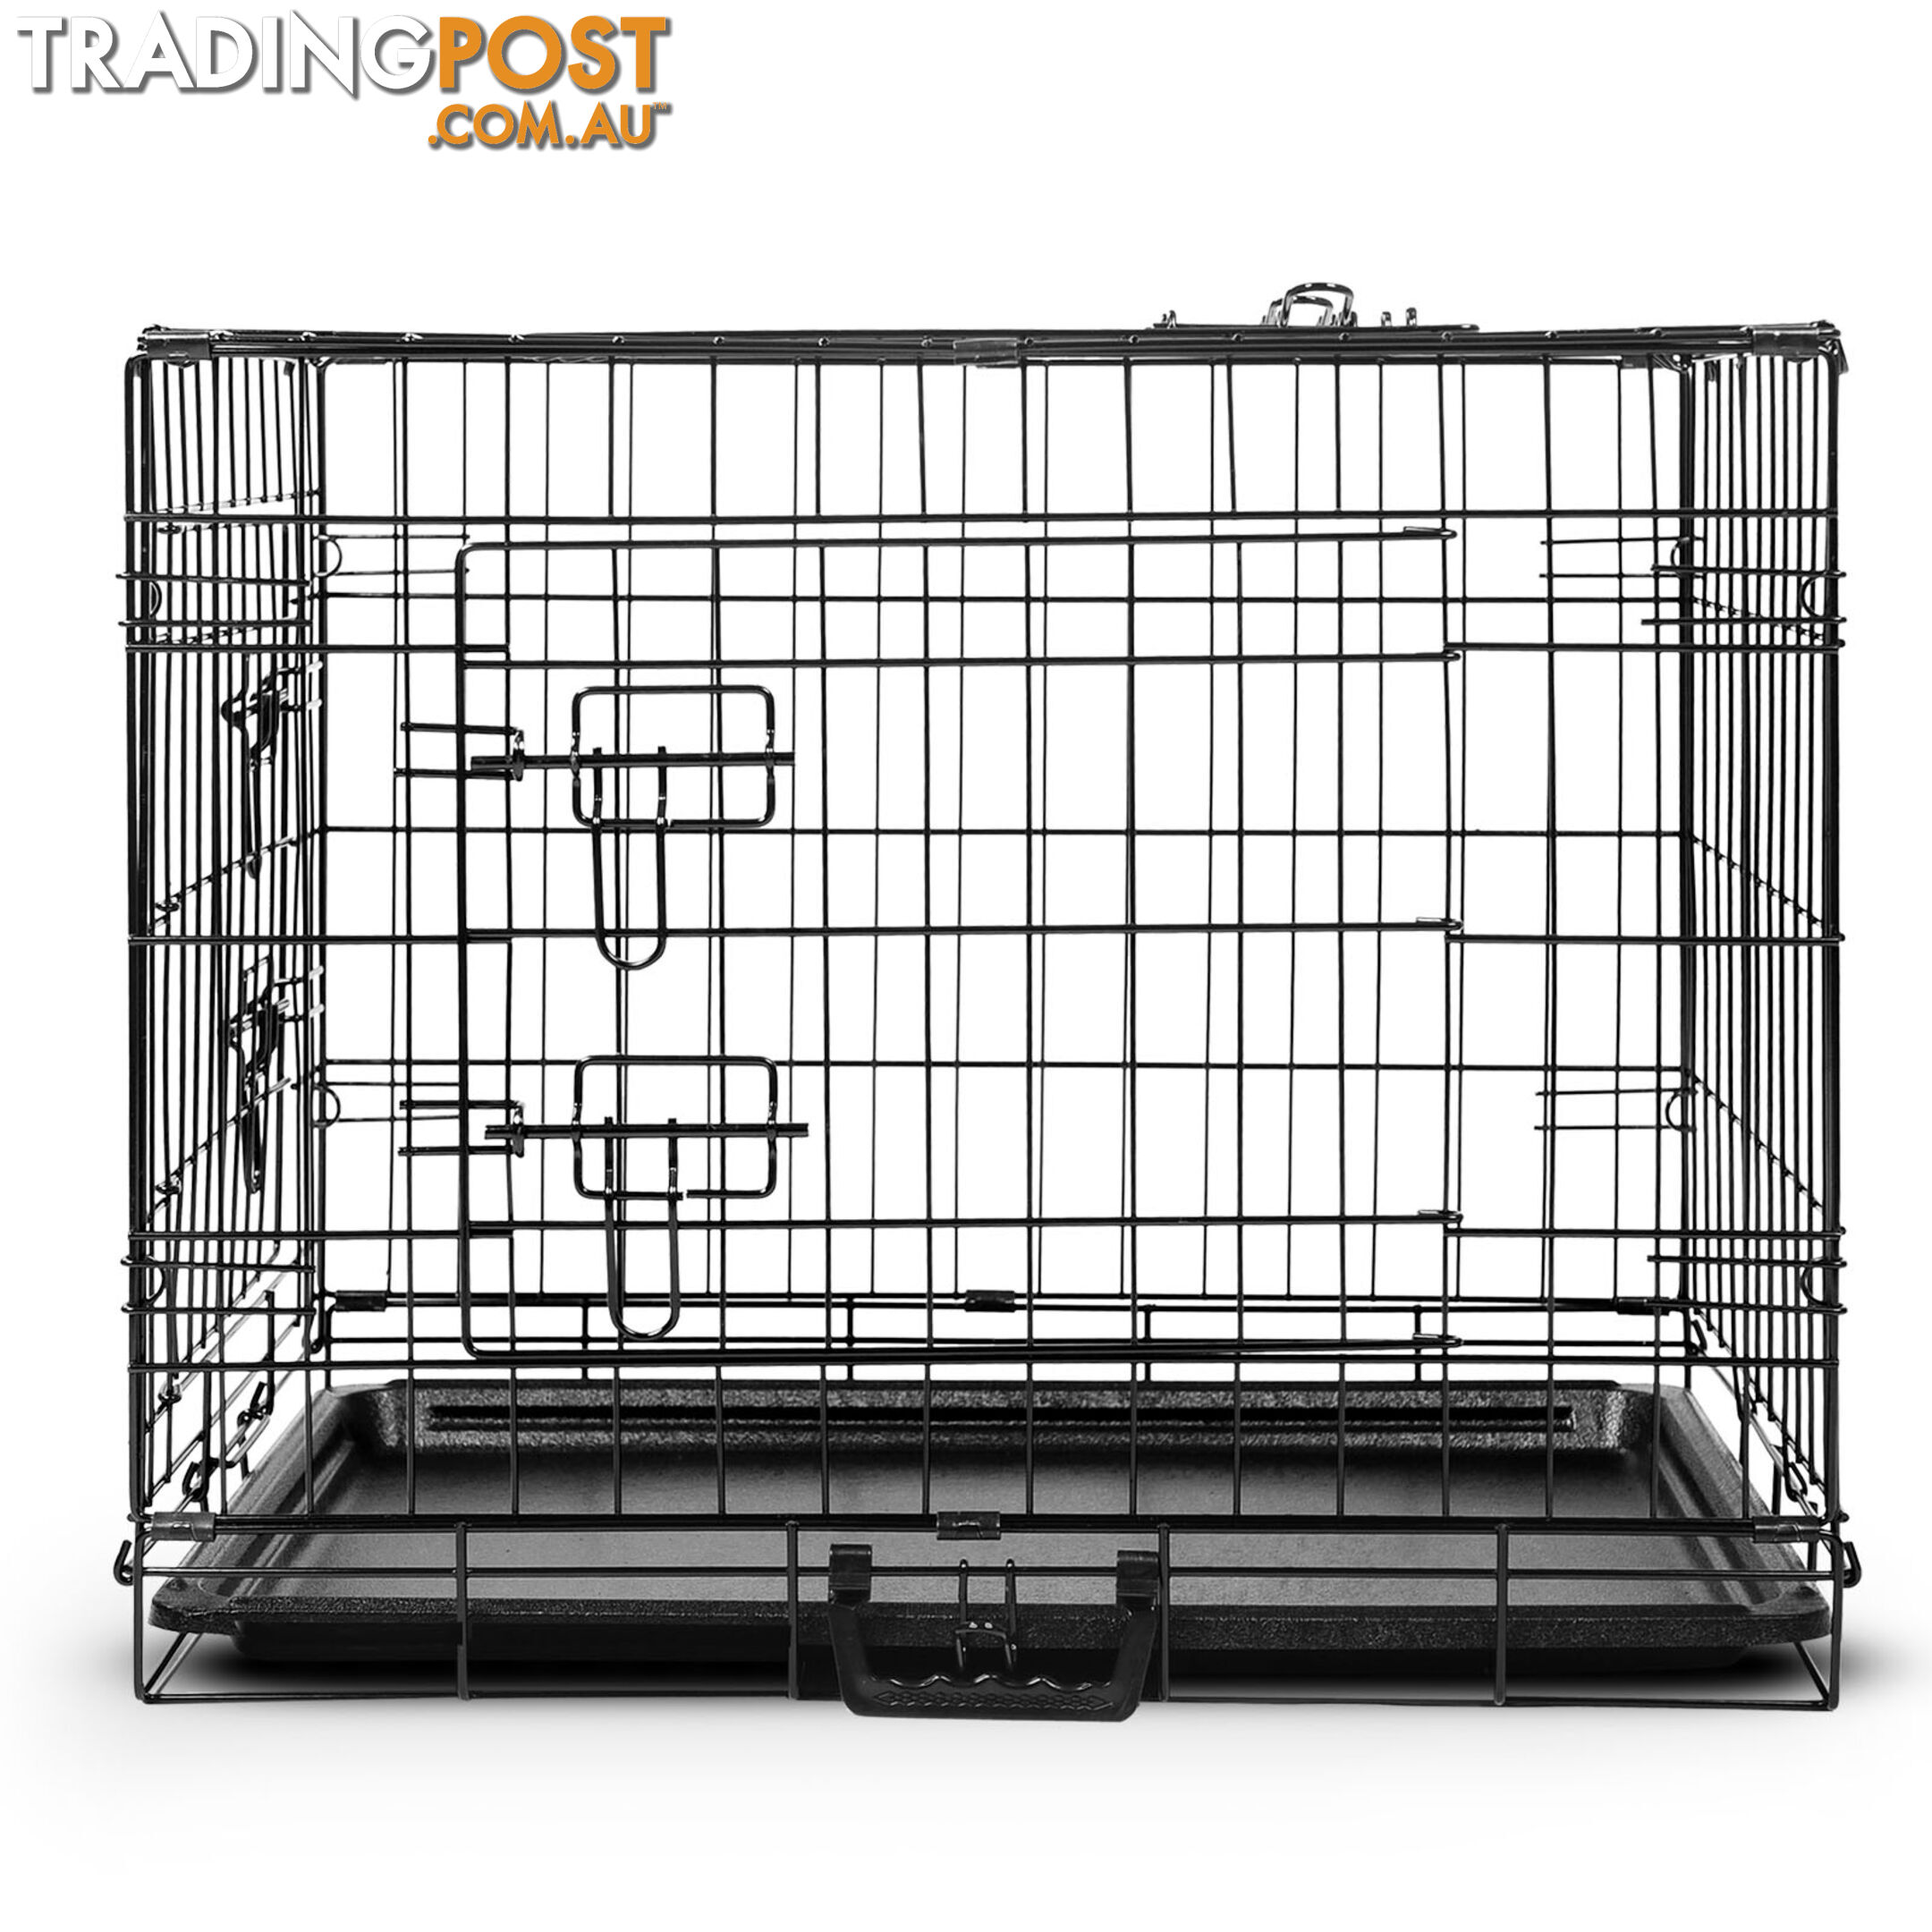 Metal Collapsible Dog Cage 24IN